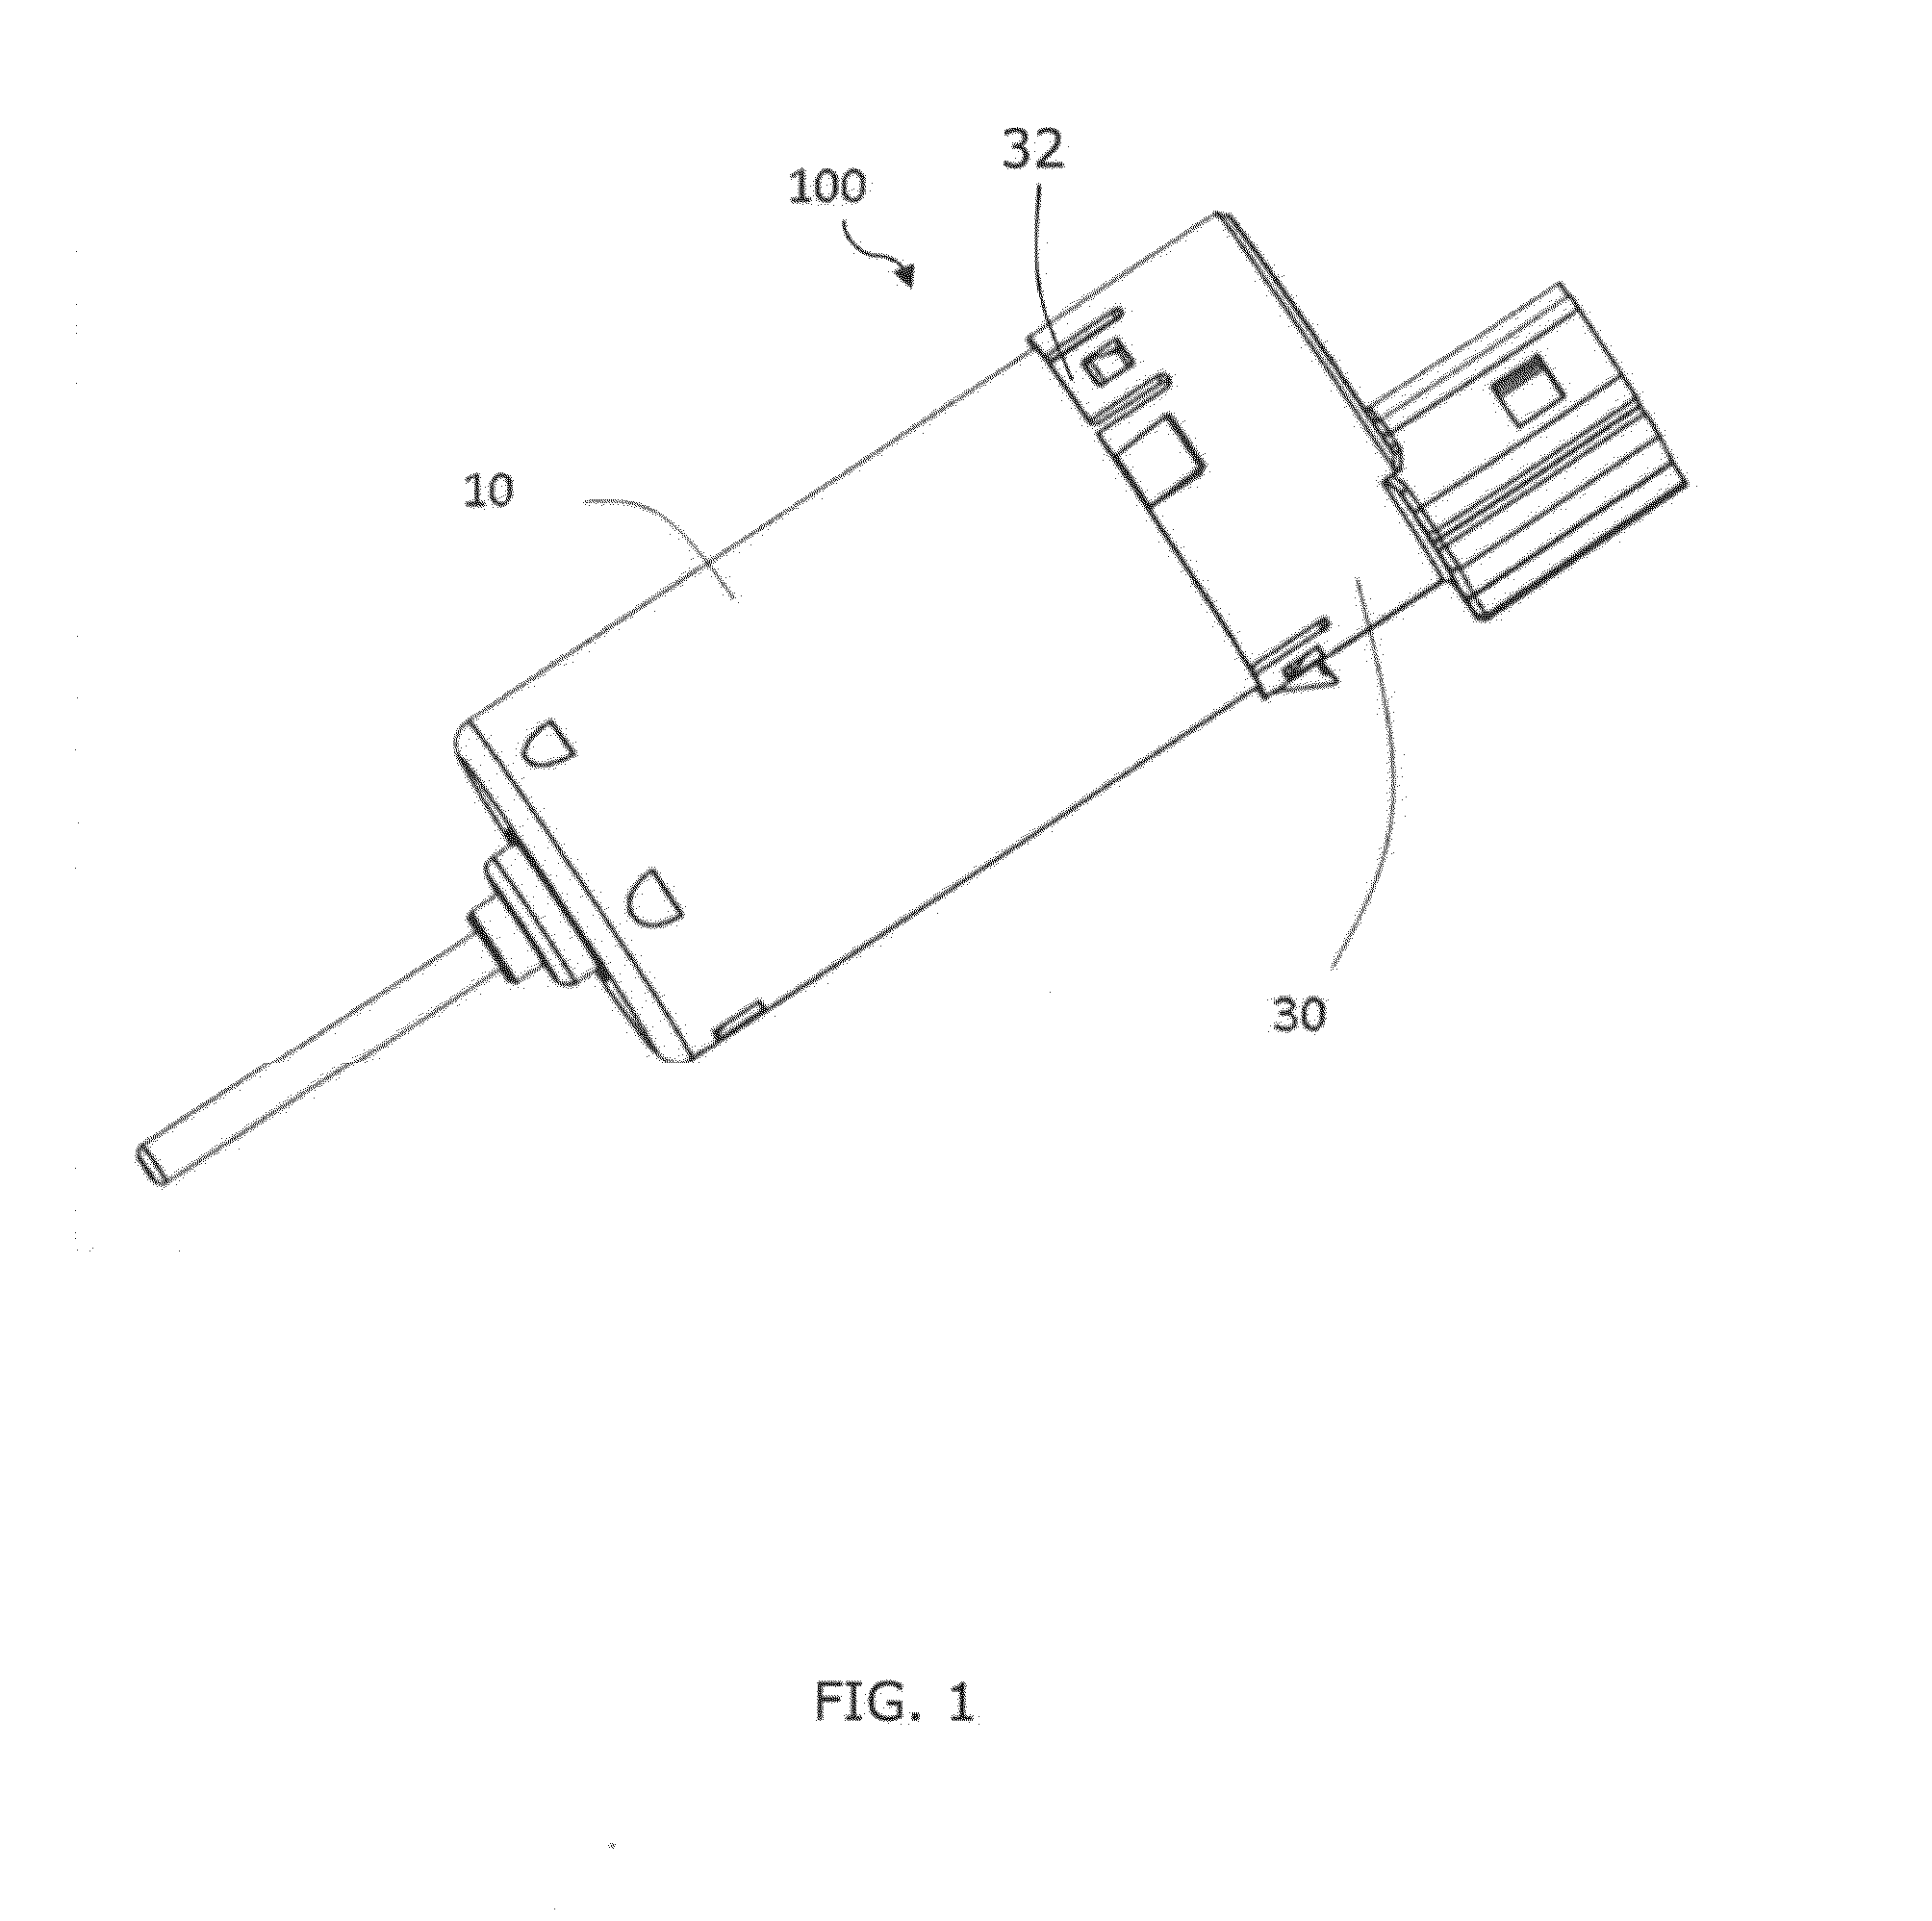 Motor and End Cap Assembly Thereof